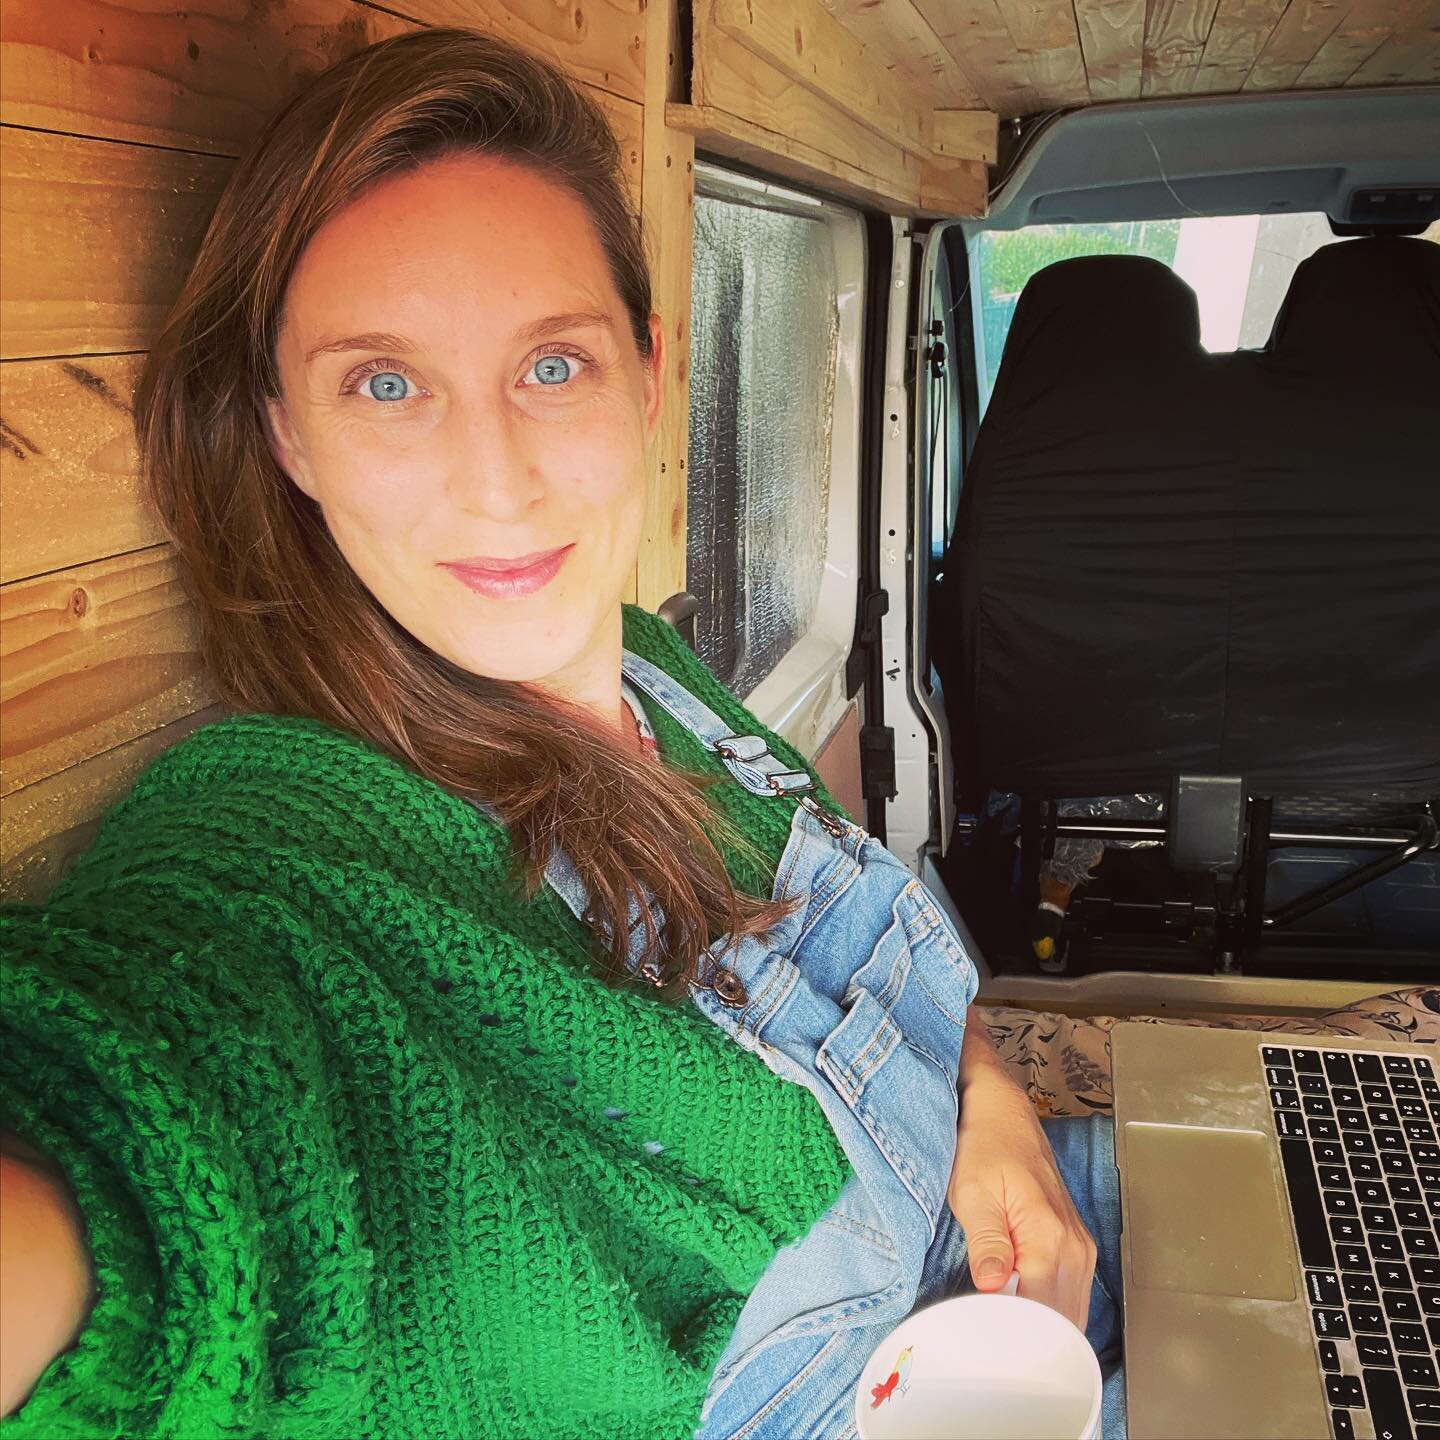 Sunny September day 🍂🍁☀️
My office for the afternoon 💻

&hellip; 💕🚐 Yeti the van with the sun beaming down

#autumnsun #autumnsunshine #septembersun #vanlife #vanlifeuk #creativespace #remoteworking #digitalnomad #digitalnomads #logcabin #logcab